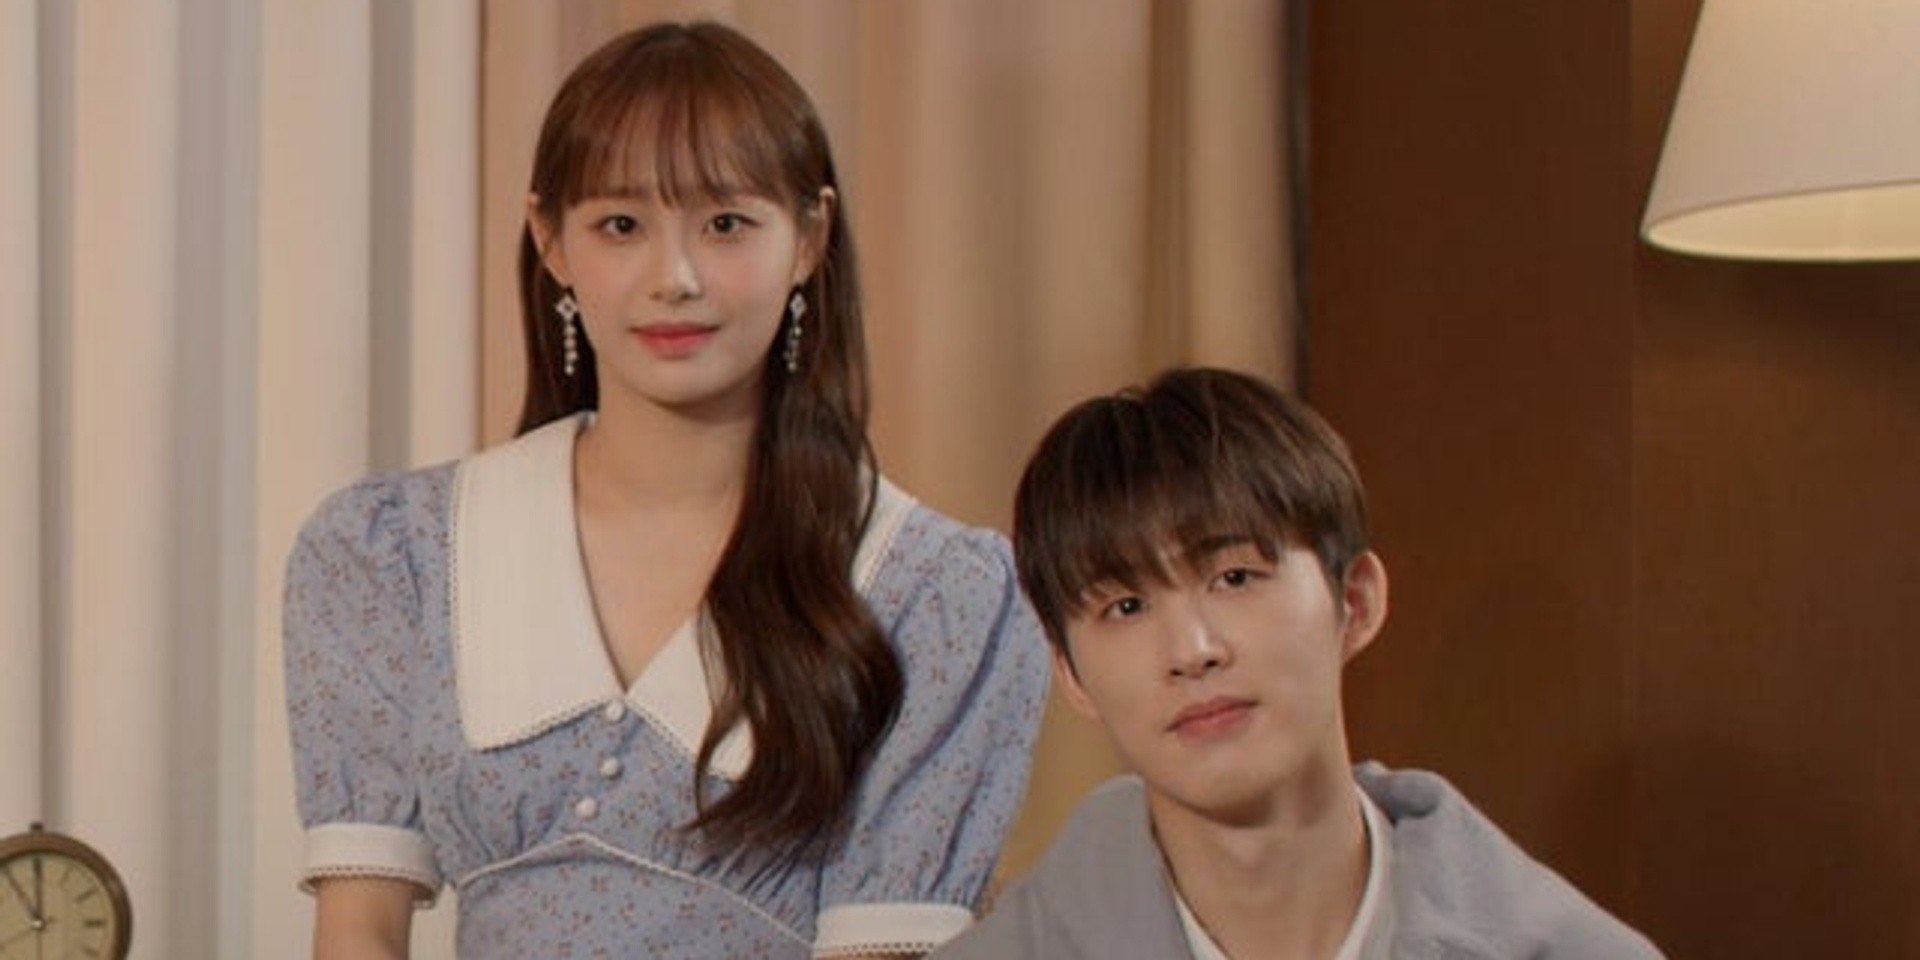 B.I and LOONA's Chuu unite in new collaboration track, 'Lullaby' — watch 